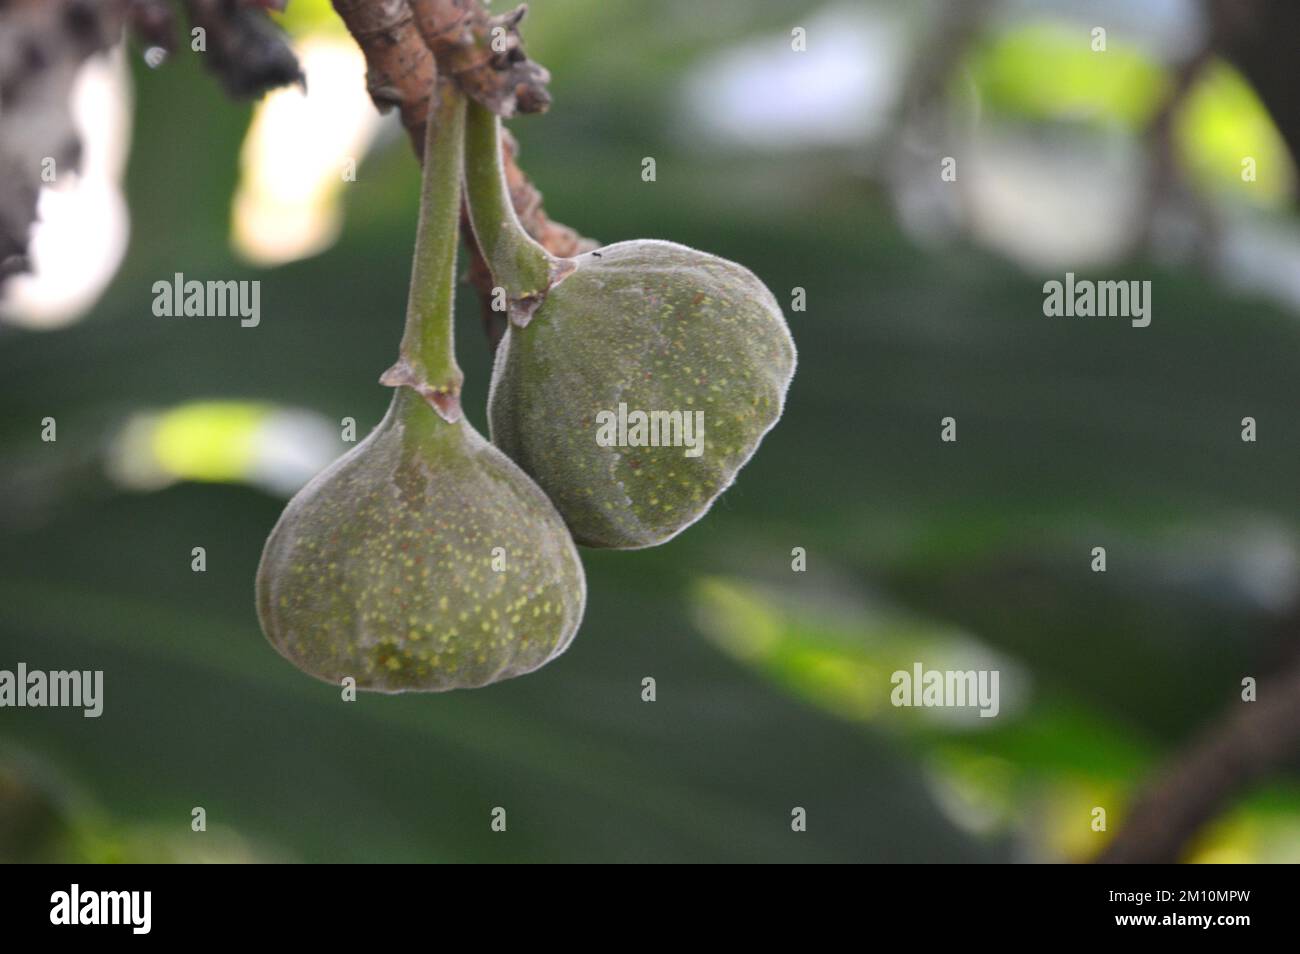 Pair of Green Roxburgh Figs (Ficus Auriculata) Hanging from Tree grown at the Eden Project, Cornwall, England, UK. Stock Photo